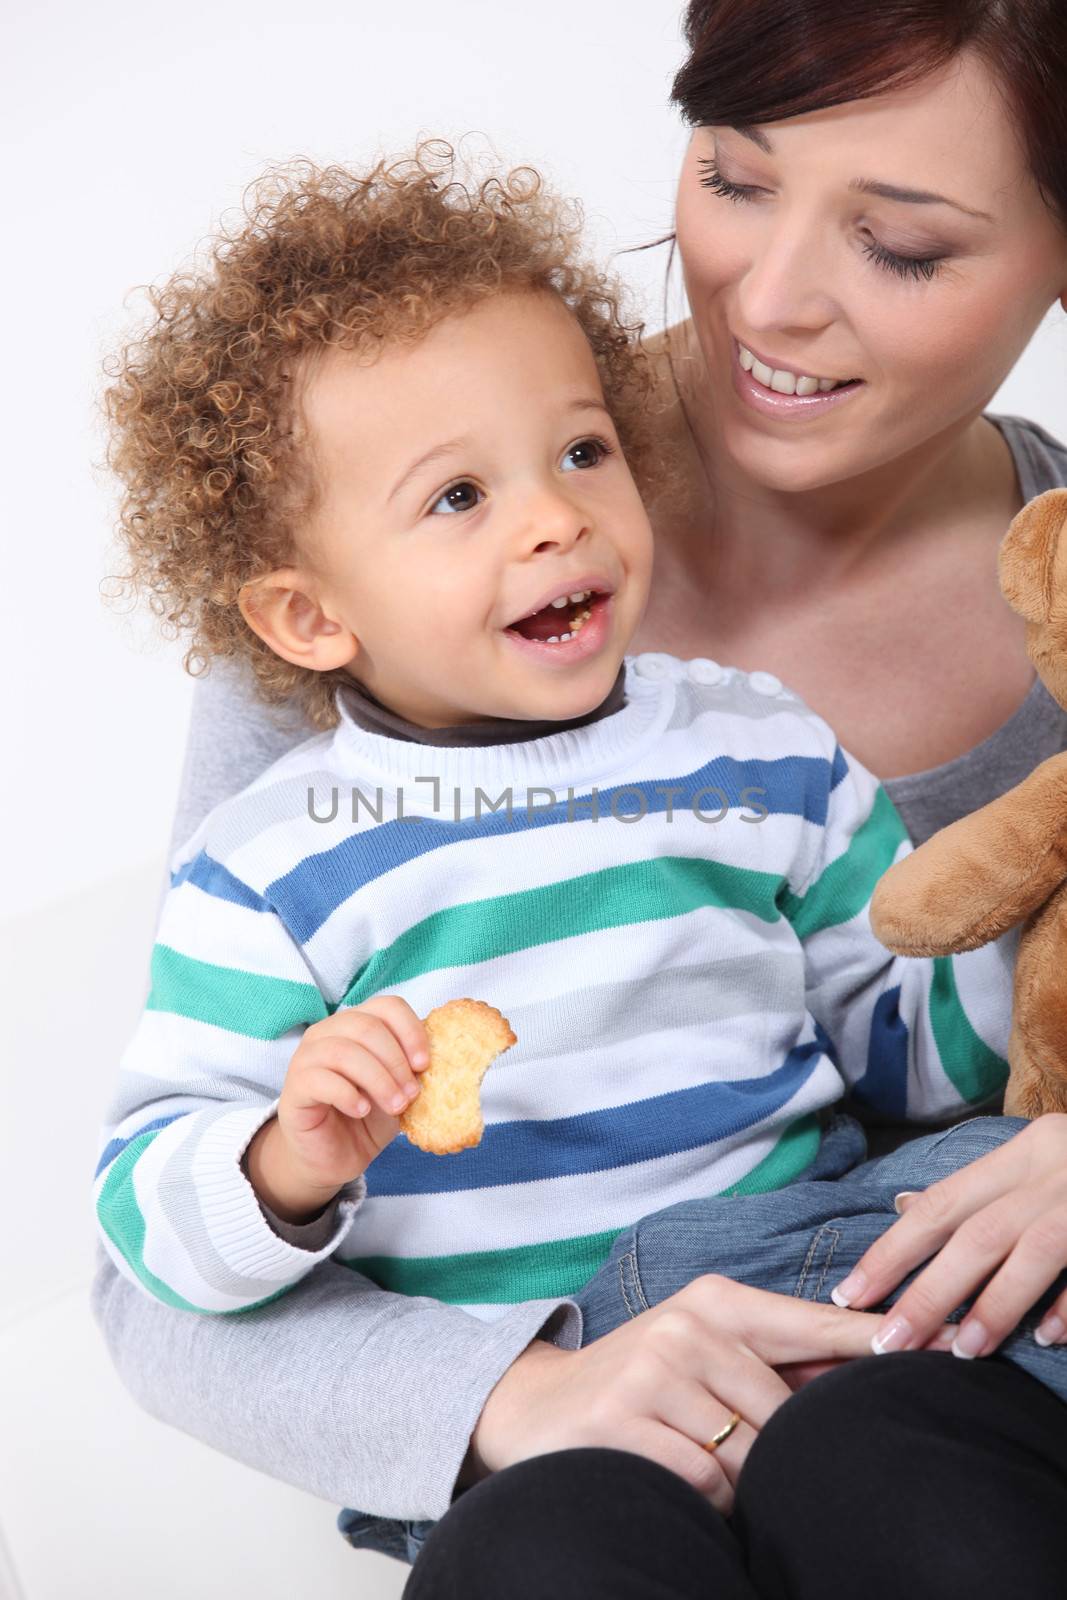 Child eating a biscuit